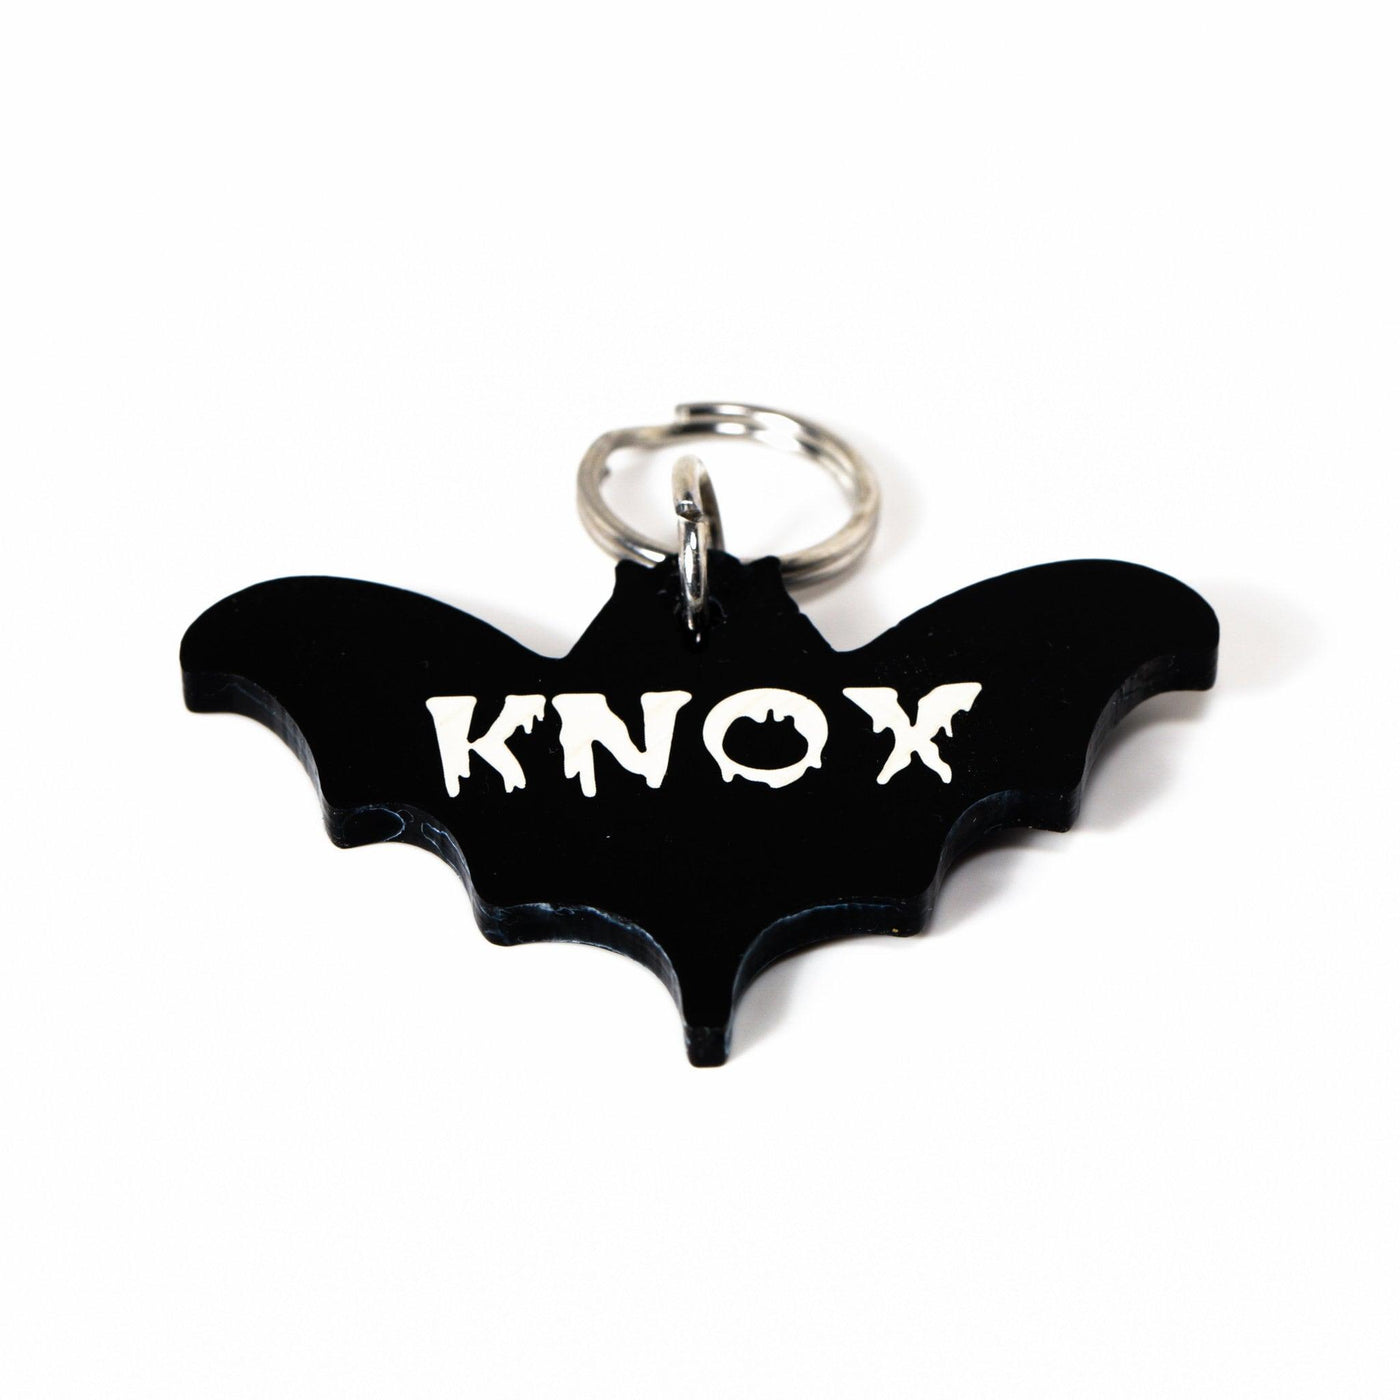 Personalized Bat Pet Tag or Human ID Tag, Perfect tag for cats, 10 different fonts available, Spooky Pet Tags, Cat ID Tag - Jones Creativity